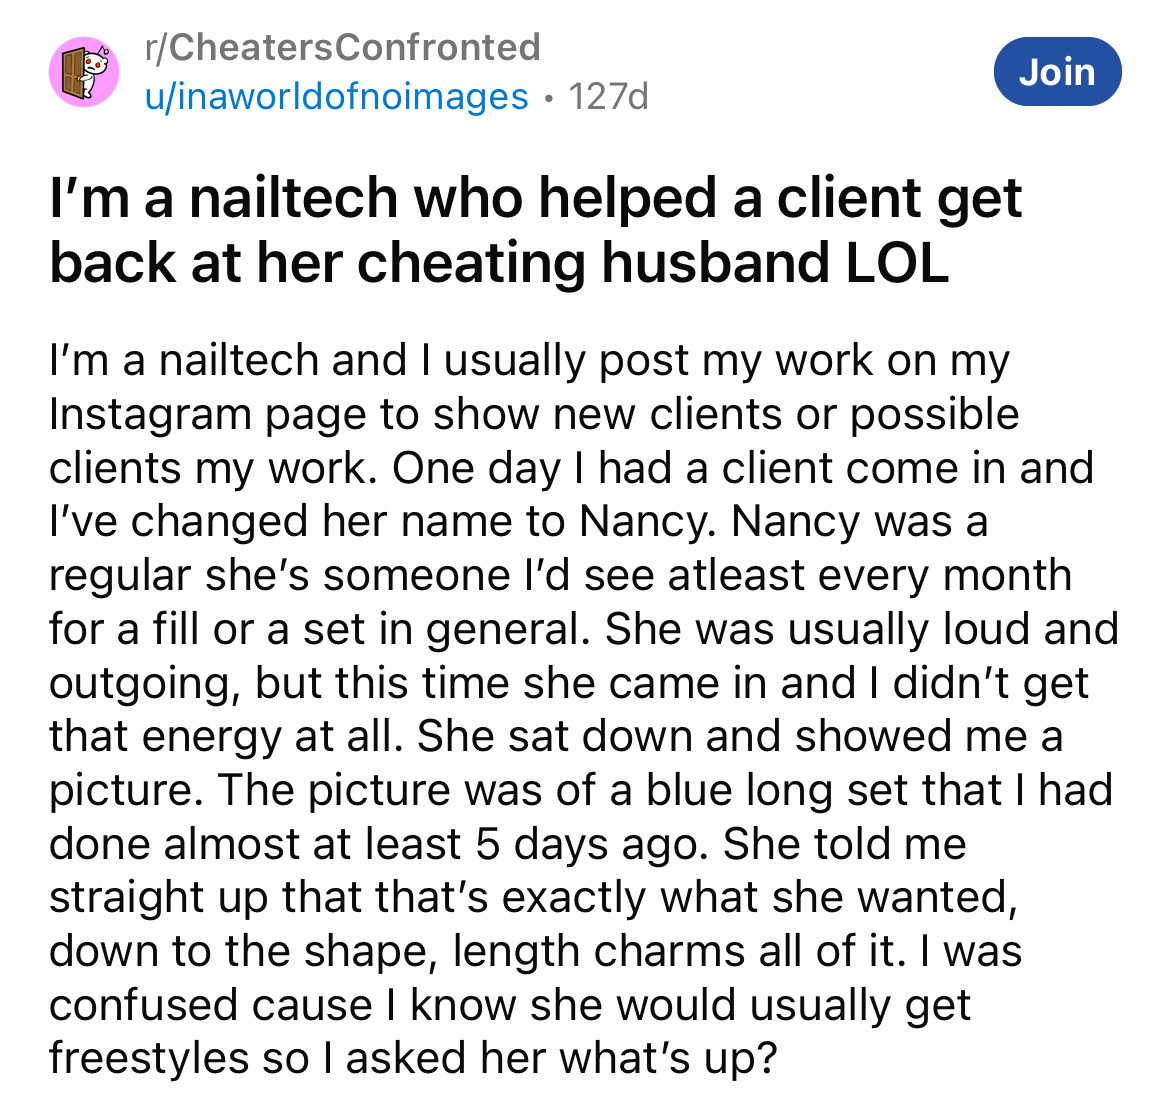 point - rCheatersConfronted uinaworldofnoimages Join 127d I'm a nailtech who helped a client get back at her cheating husband Lol I'm a nailtech and I usually post my work on my Instagram page to show new clients or possible clients my work. One day I had